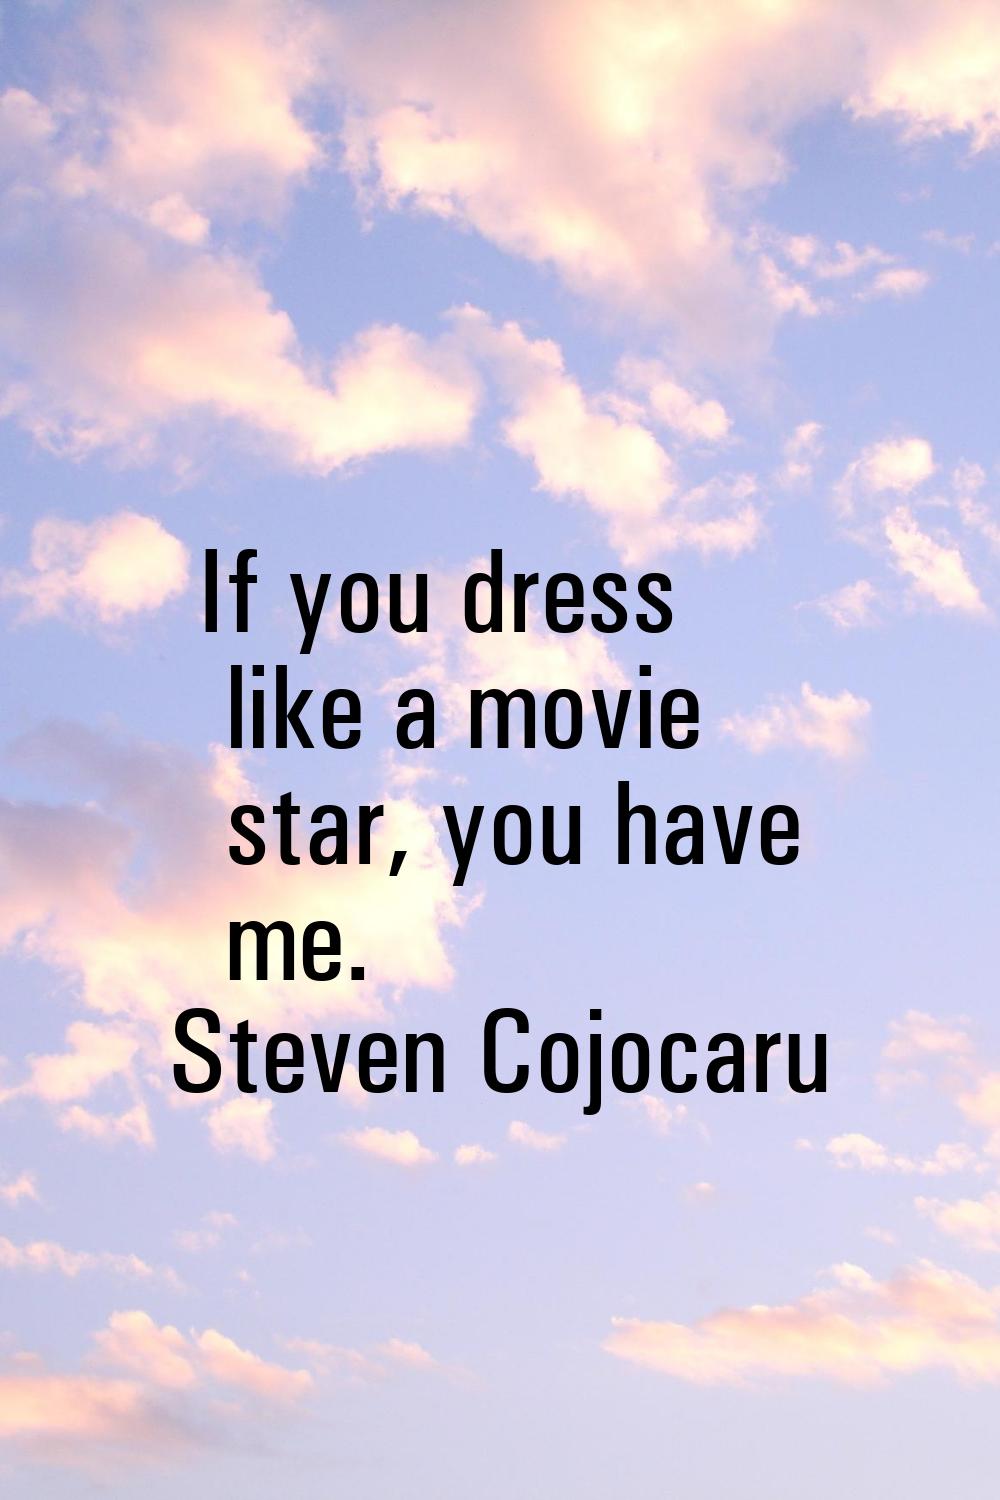 If you dress like a movie star, you have me.